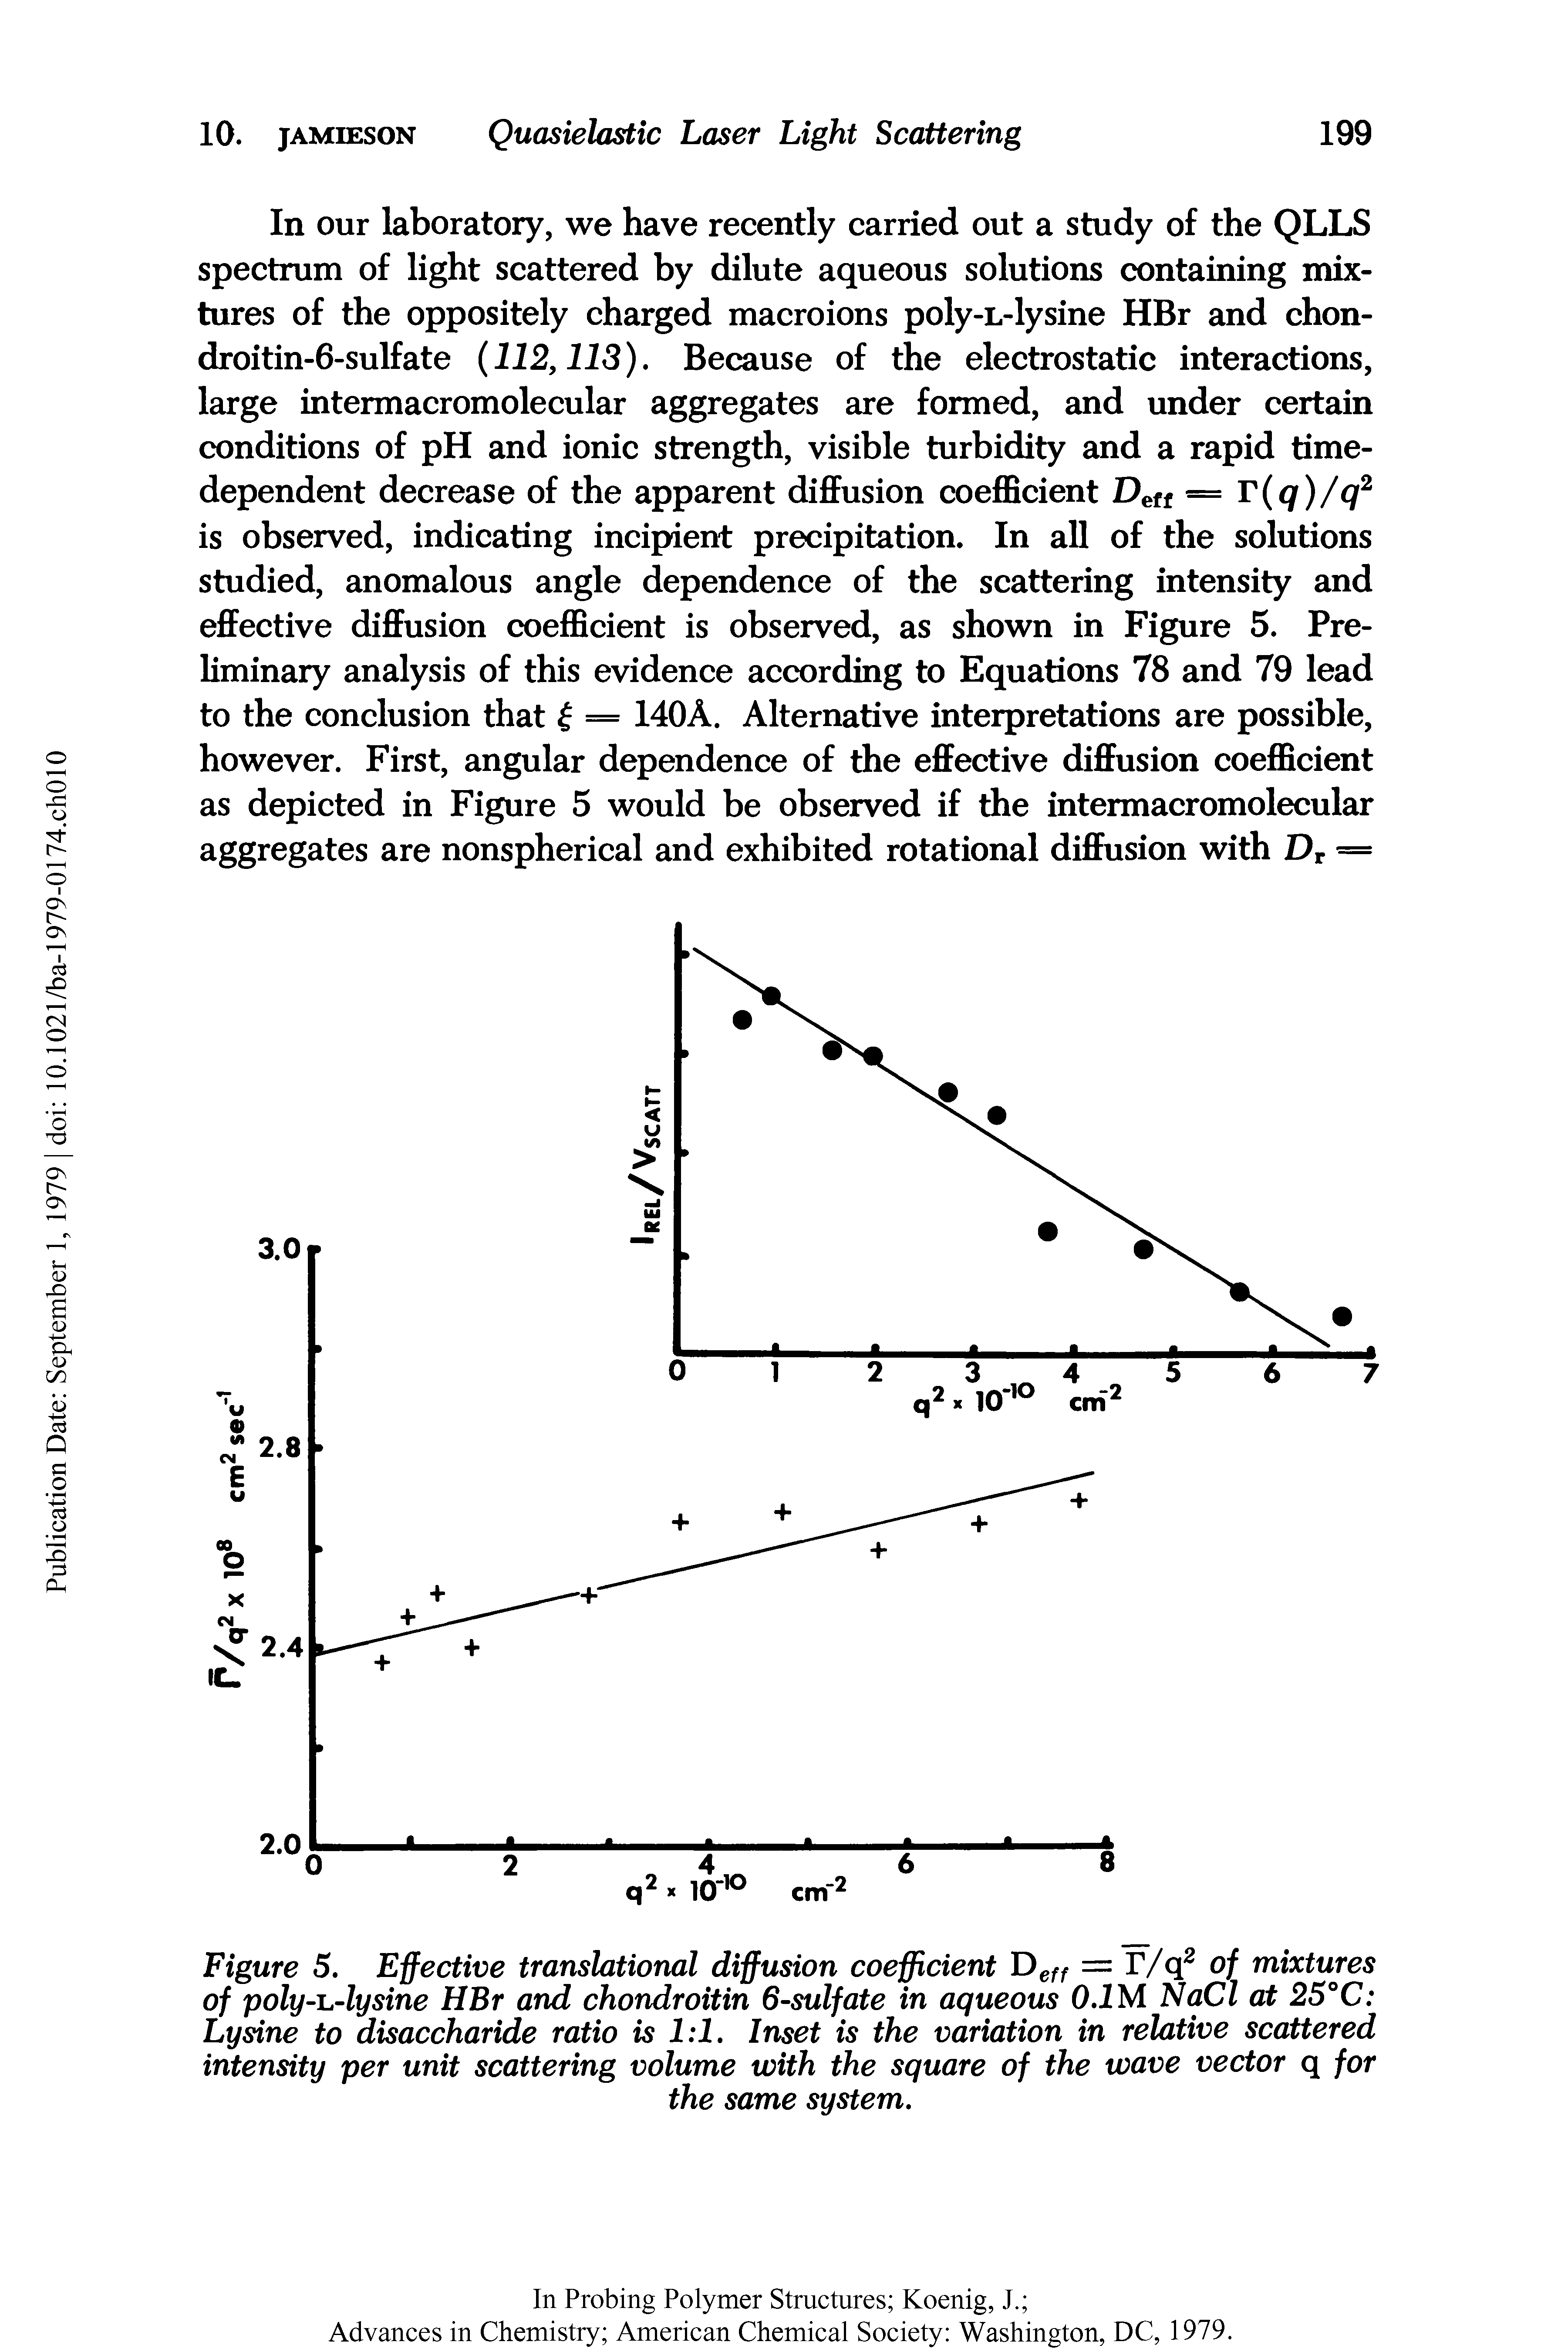 Figure 5. Effective translational diffusion coefficient D ff = T/q of mixtures of poly-ia-lysine HBr and chondroitin 6-sulfate in aqueous 0.1 M NaCl at 25°C Lysine to disaccharide ratio is 1 1. Inset is the variation in relative scattered intensity per unit scattering volume with the square of the wave vector q for...